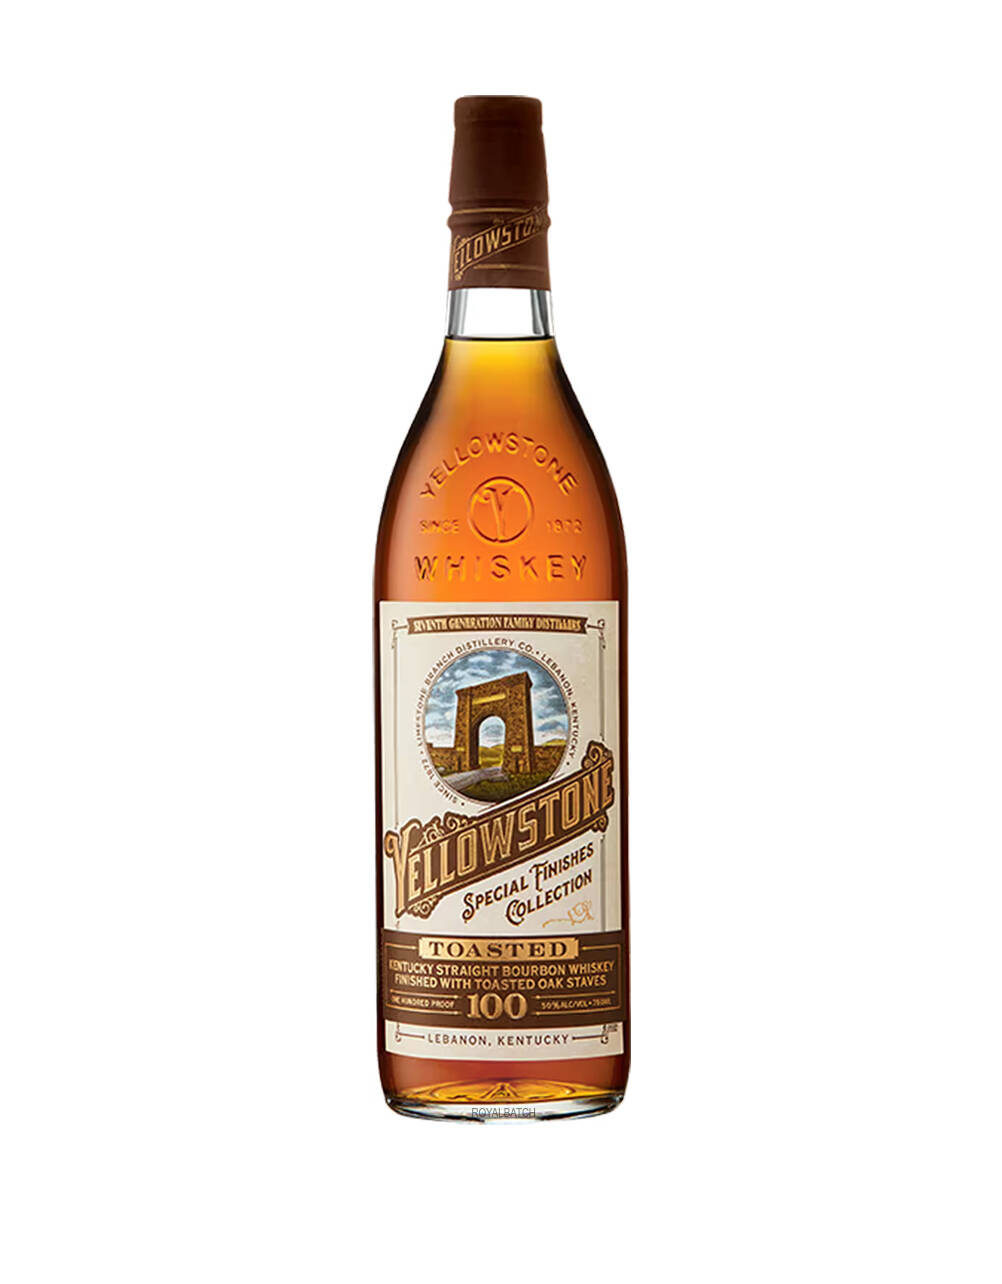 Yellowstone Toasted Special Finishes Collection Bourbon Whiskey